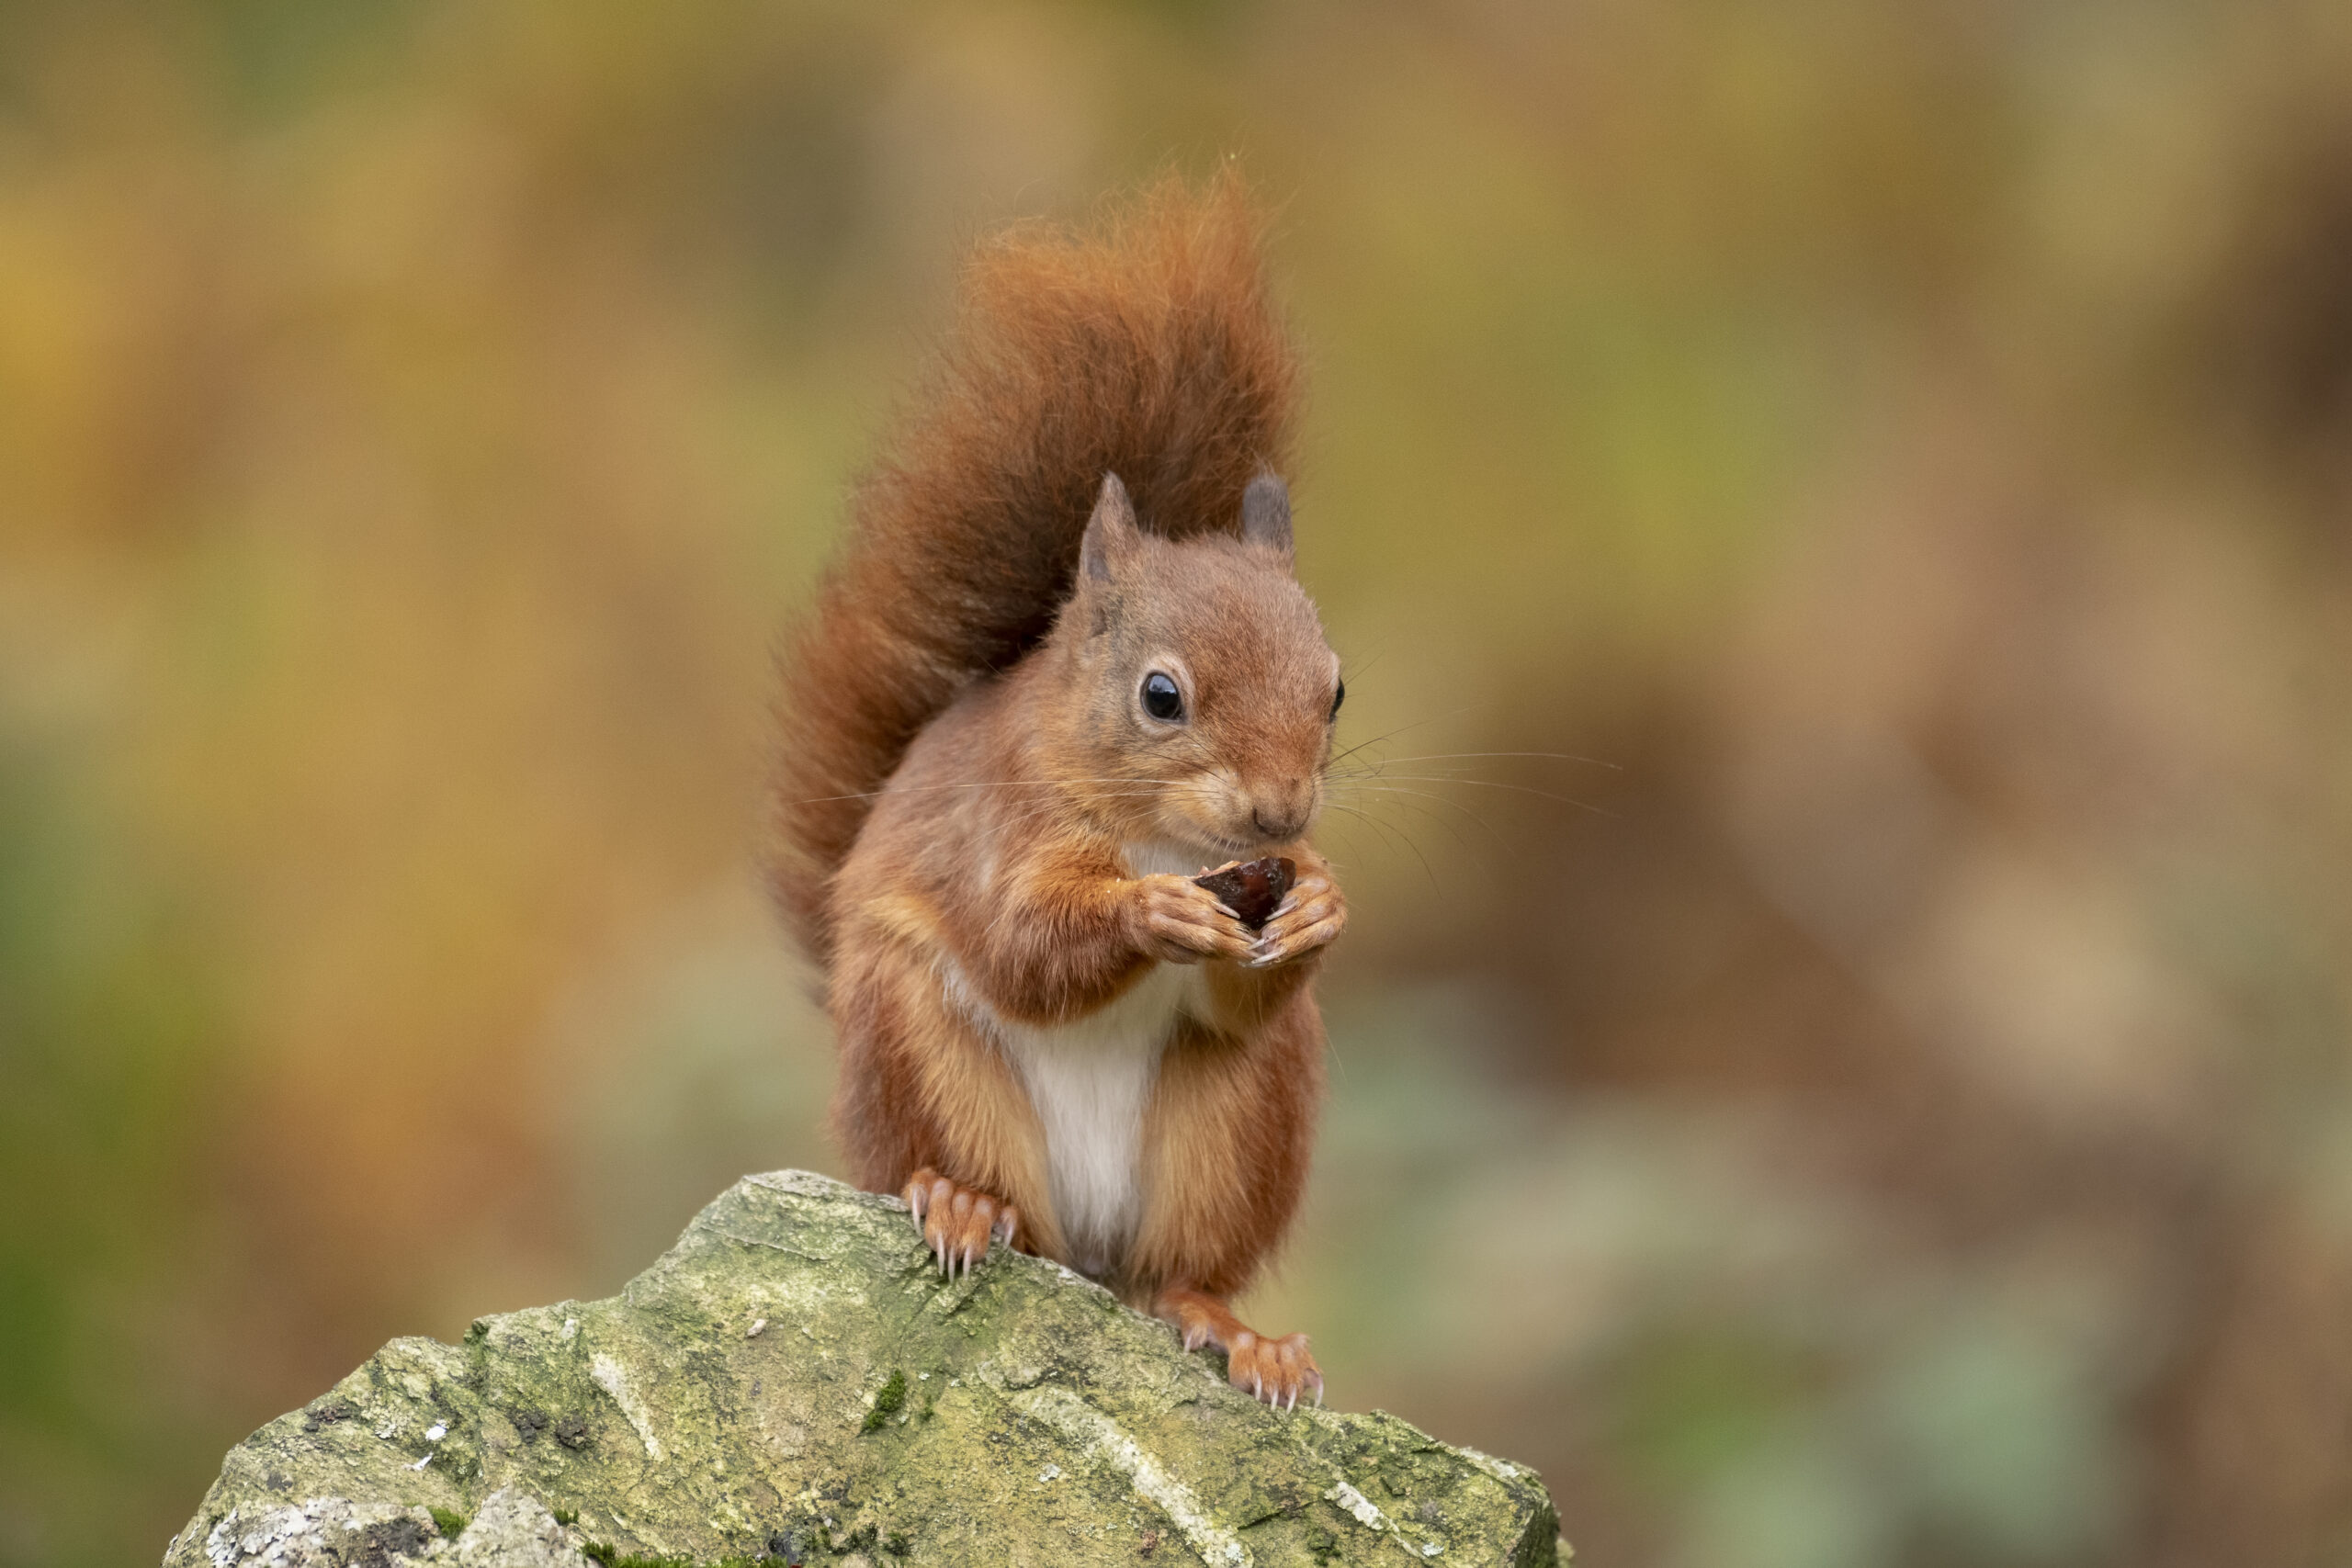 A close up of a Red Squirrel stood on its hind legs on a rock eating a nut it's holding in it's front paws.